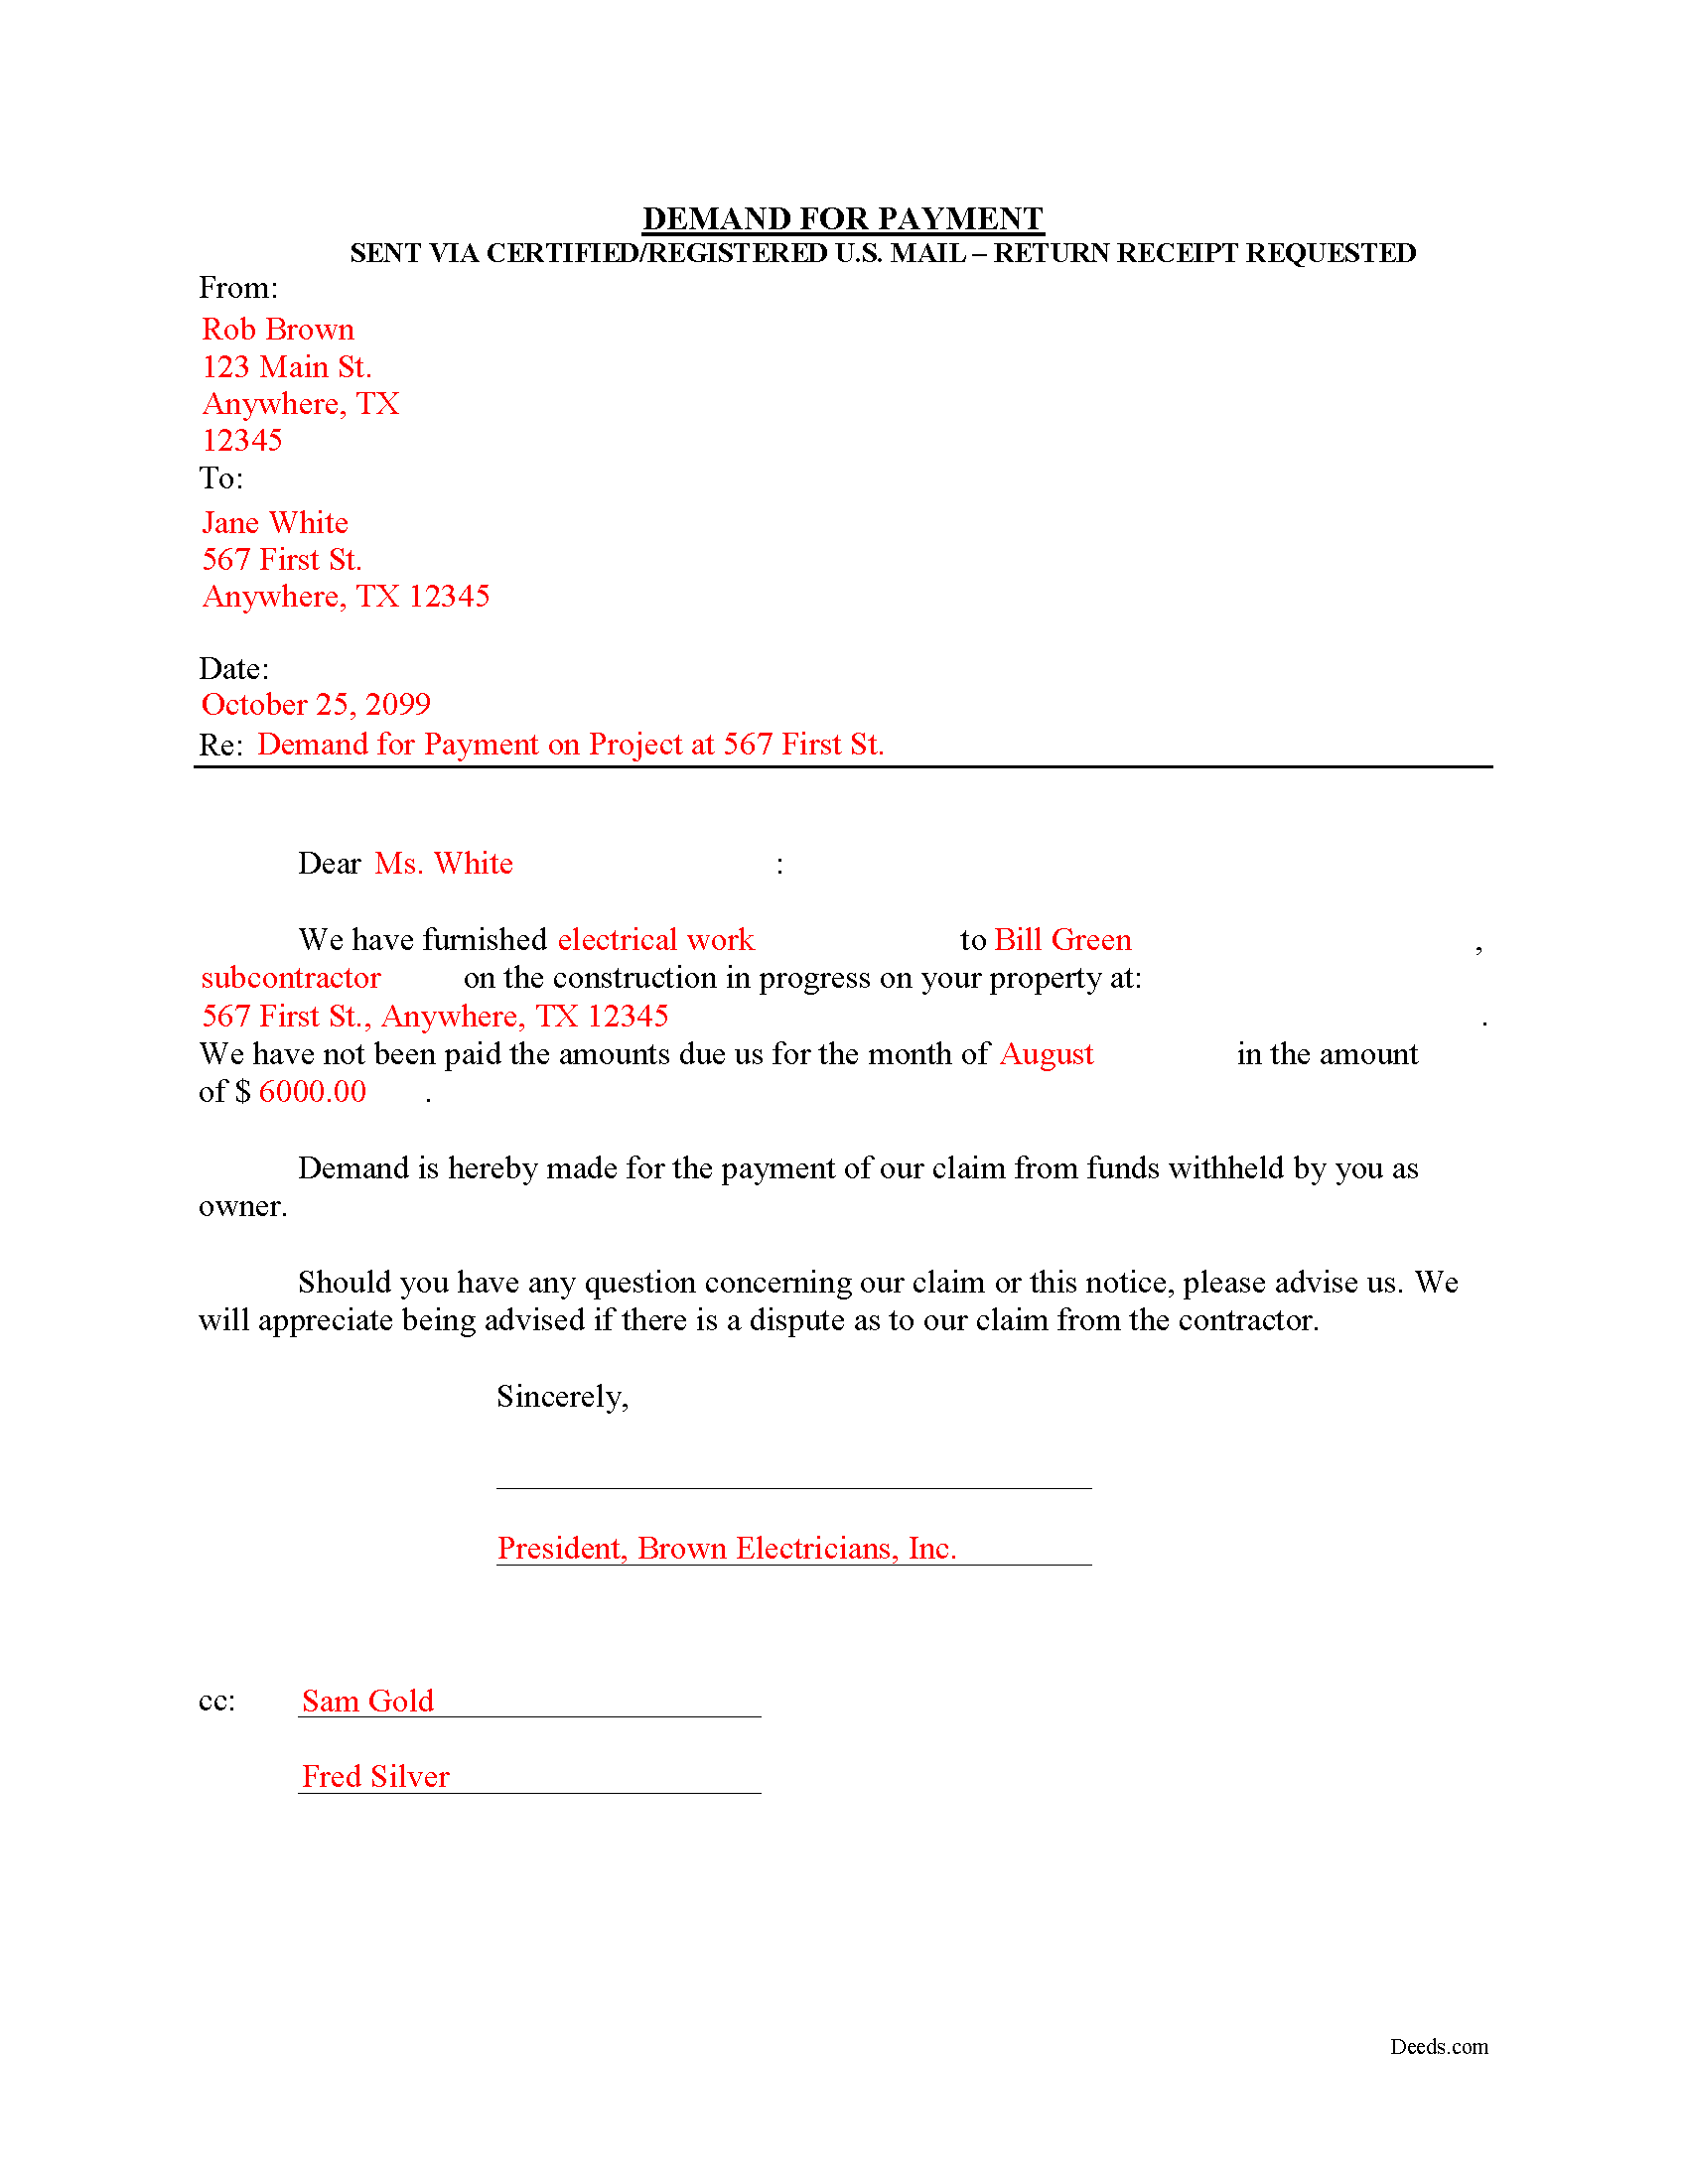 Completed Example of the Demand for Payment Document